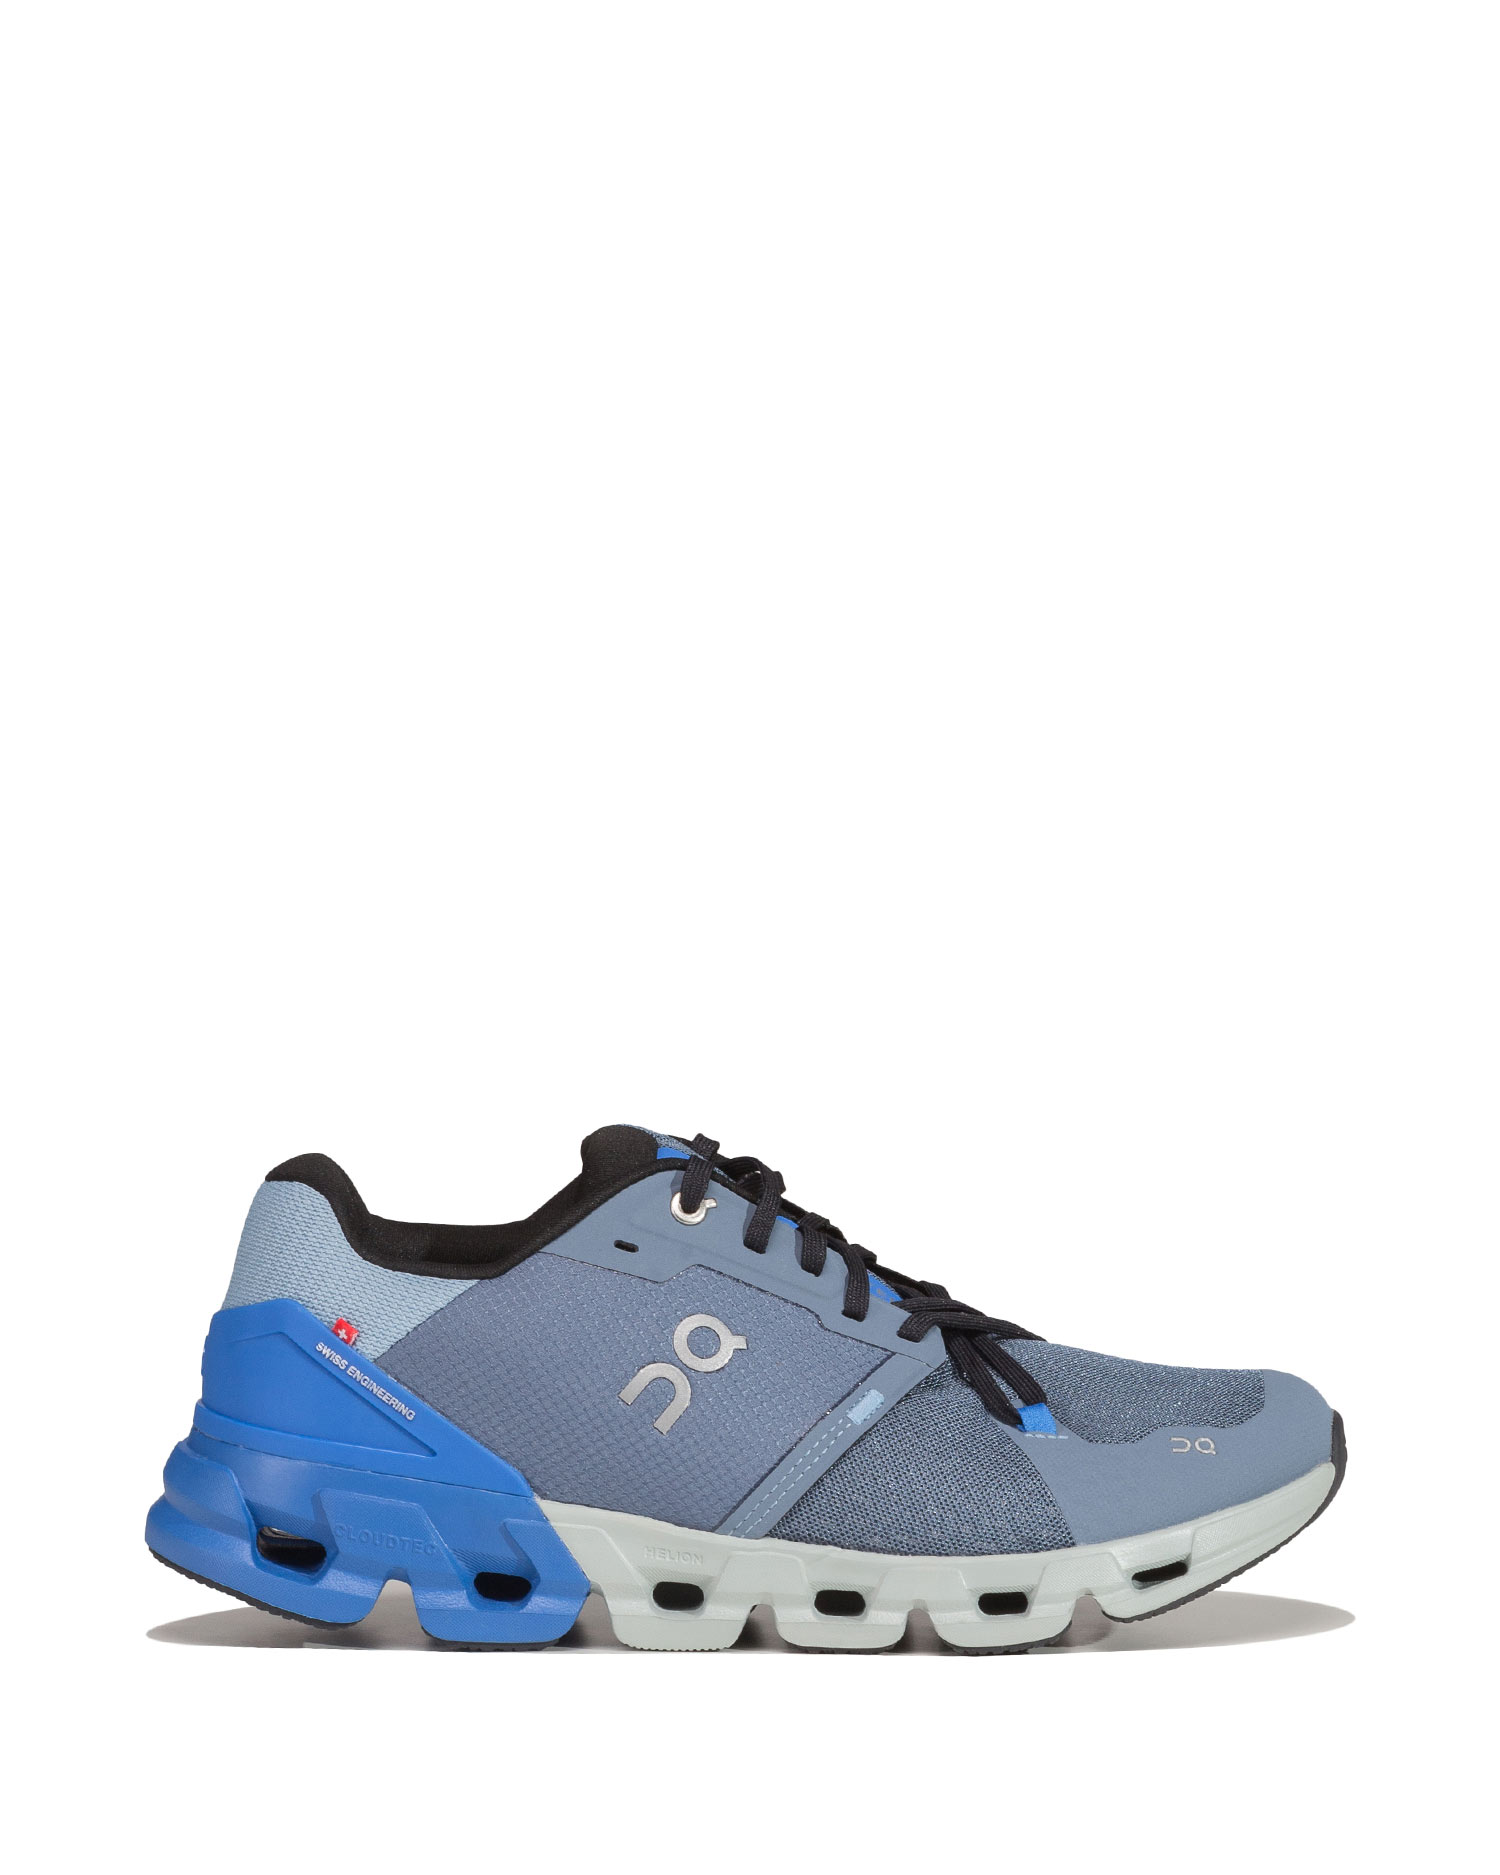 Chaussures homme ON RUNNING CLOUDFLYER 4 7198675-metal-lapis | S'portofino